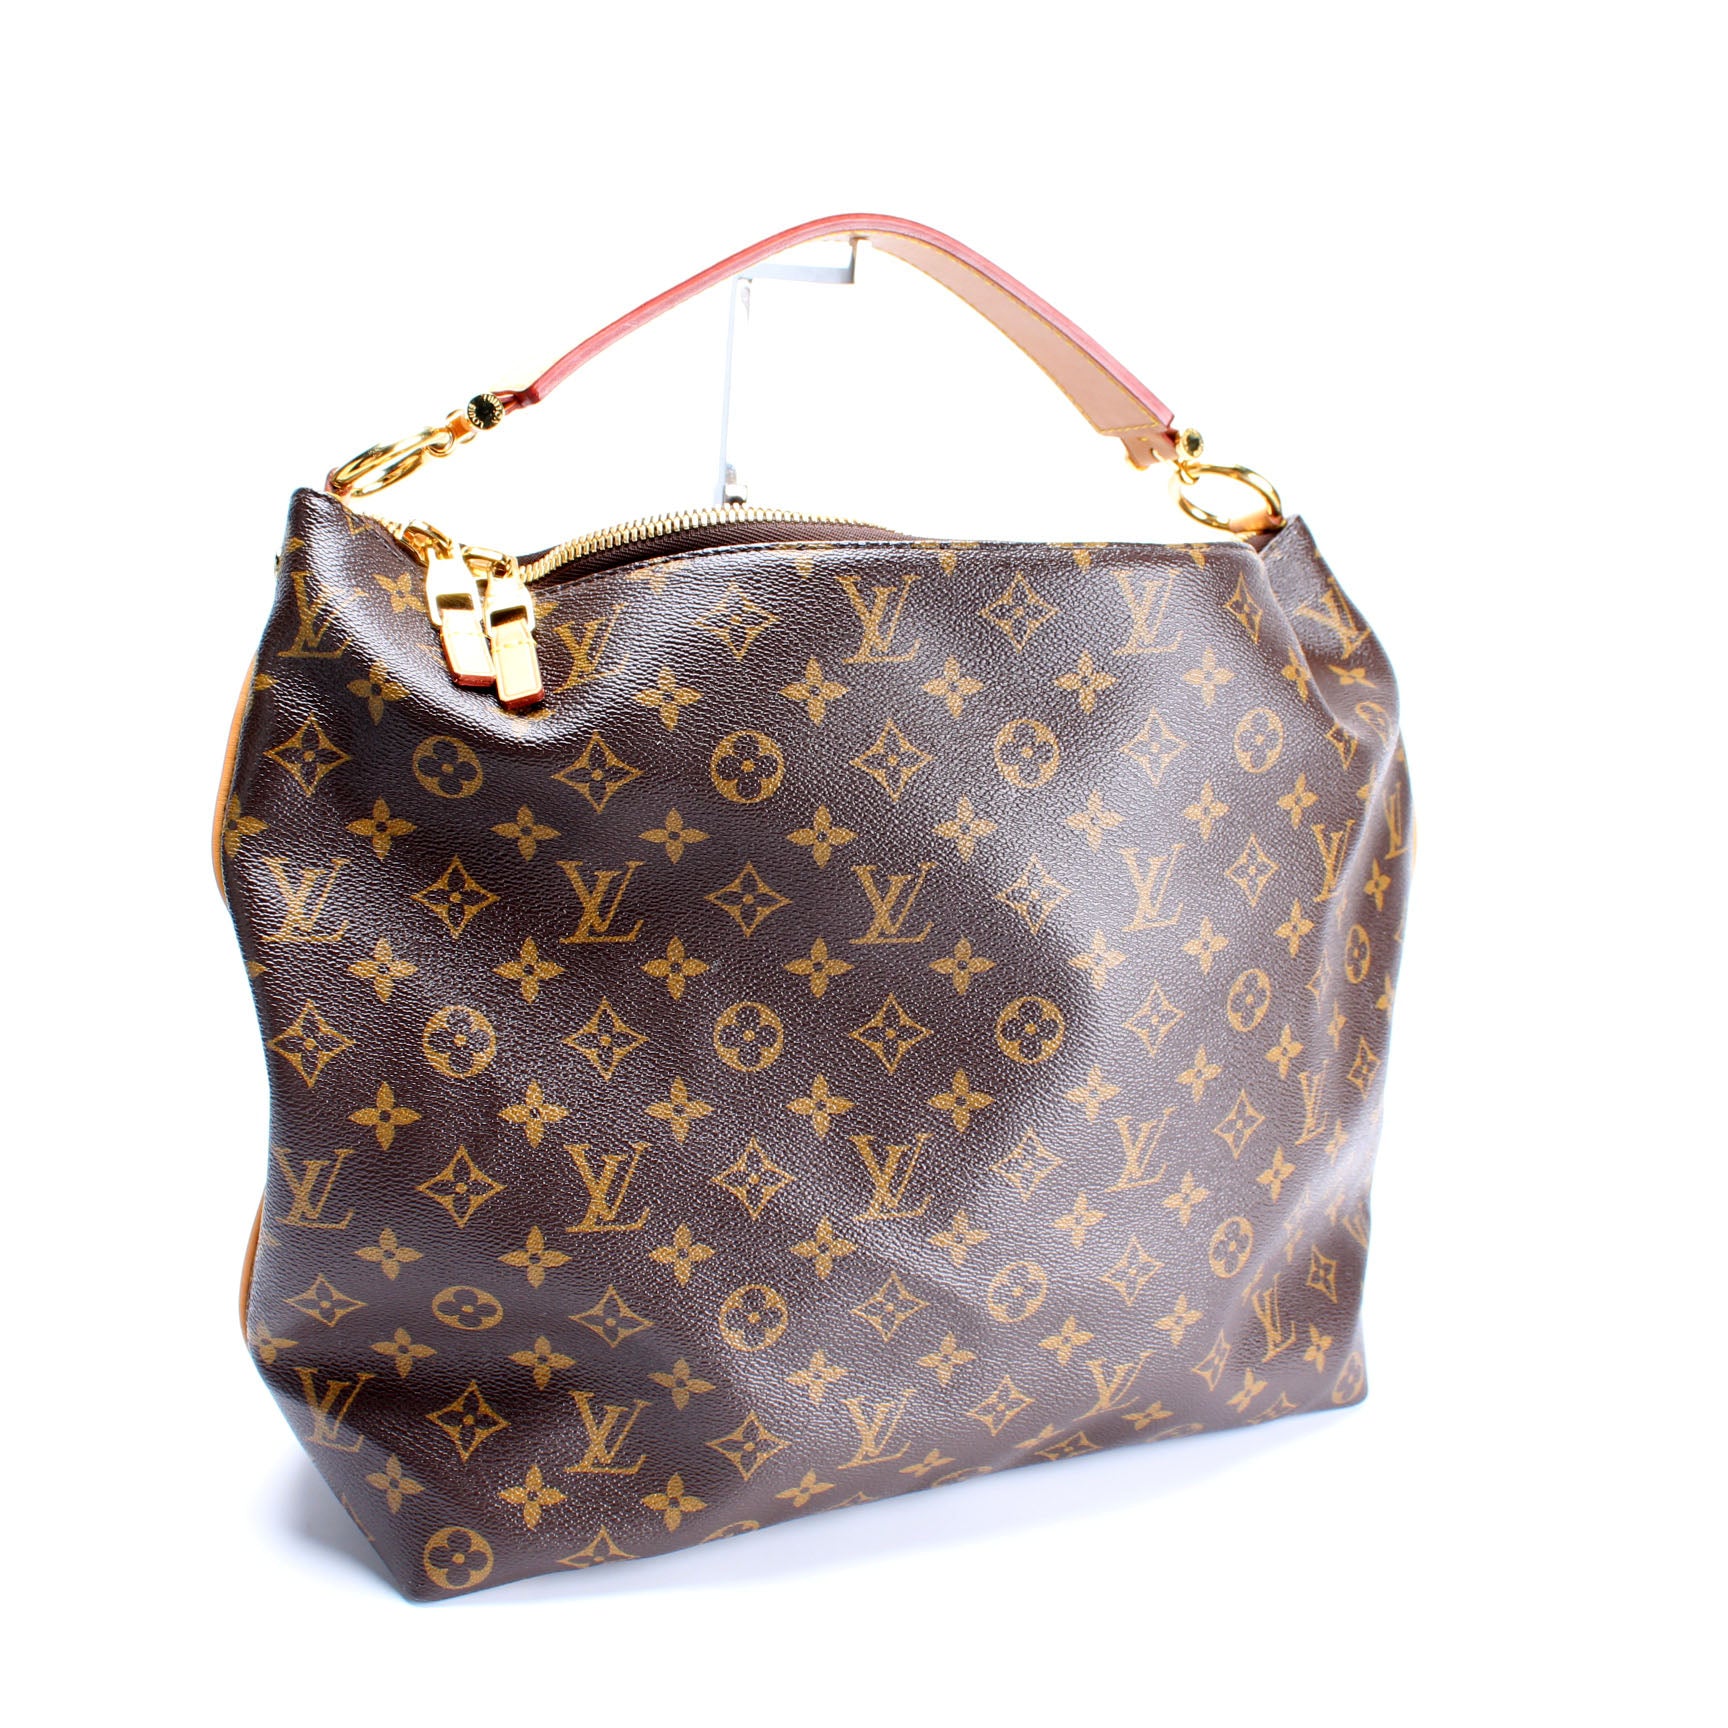 New Authentic Sully MM Monogram louis vuitton bag for Sale in